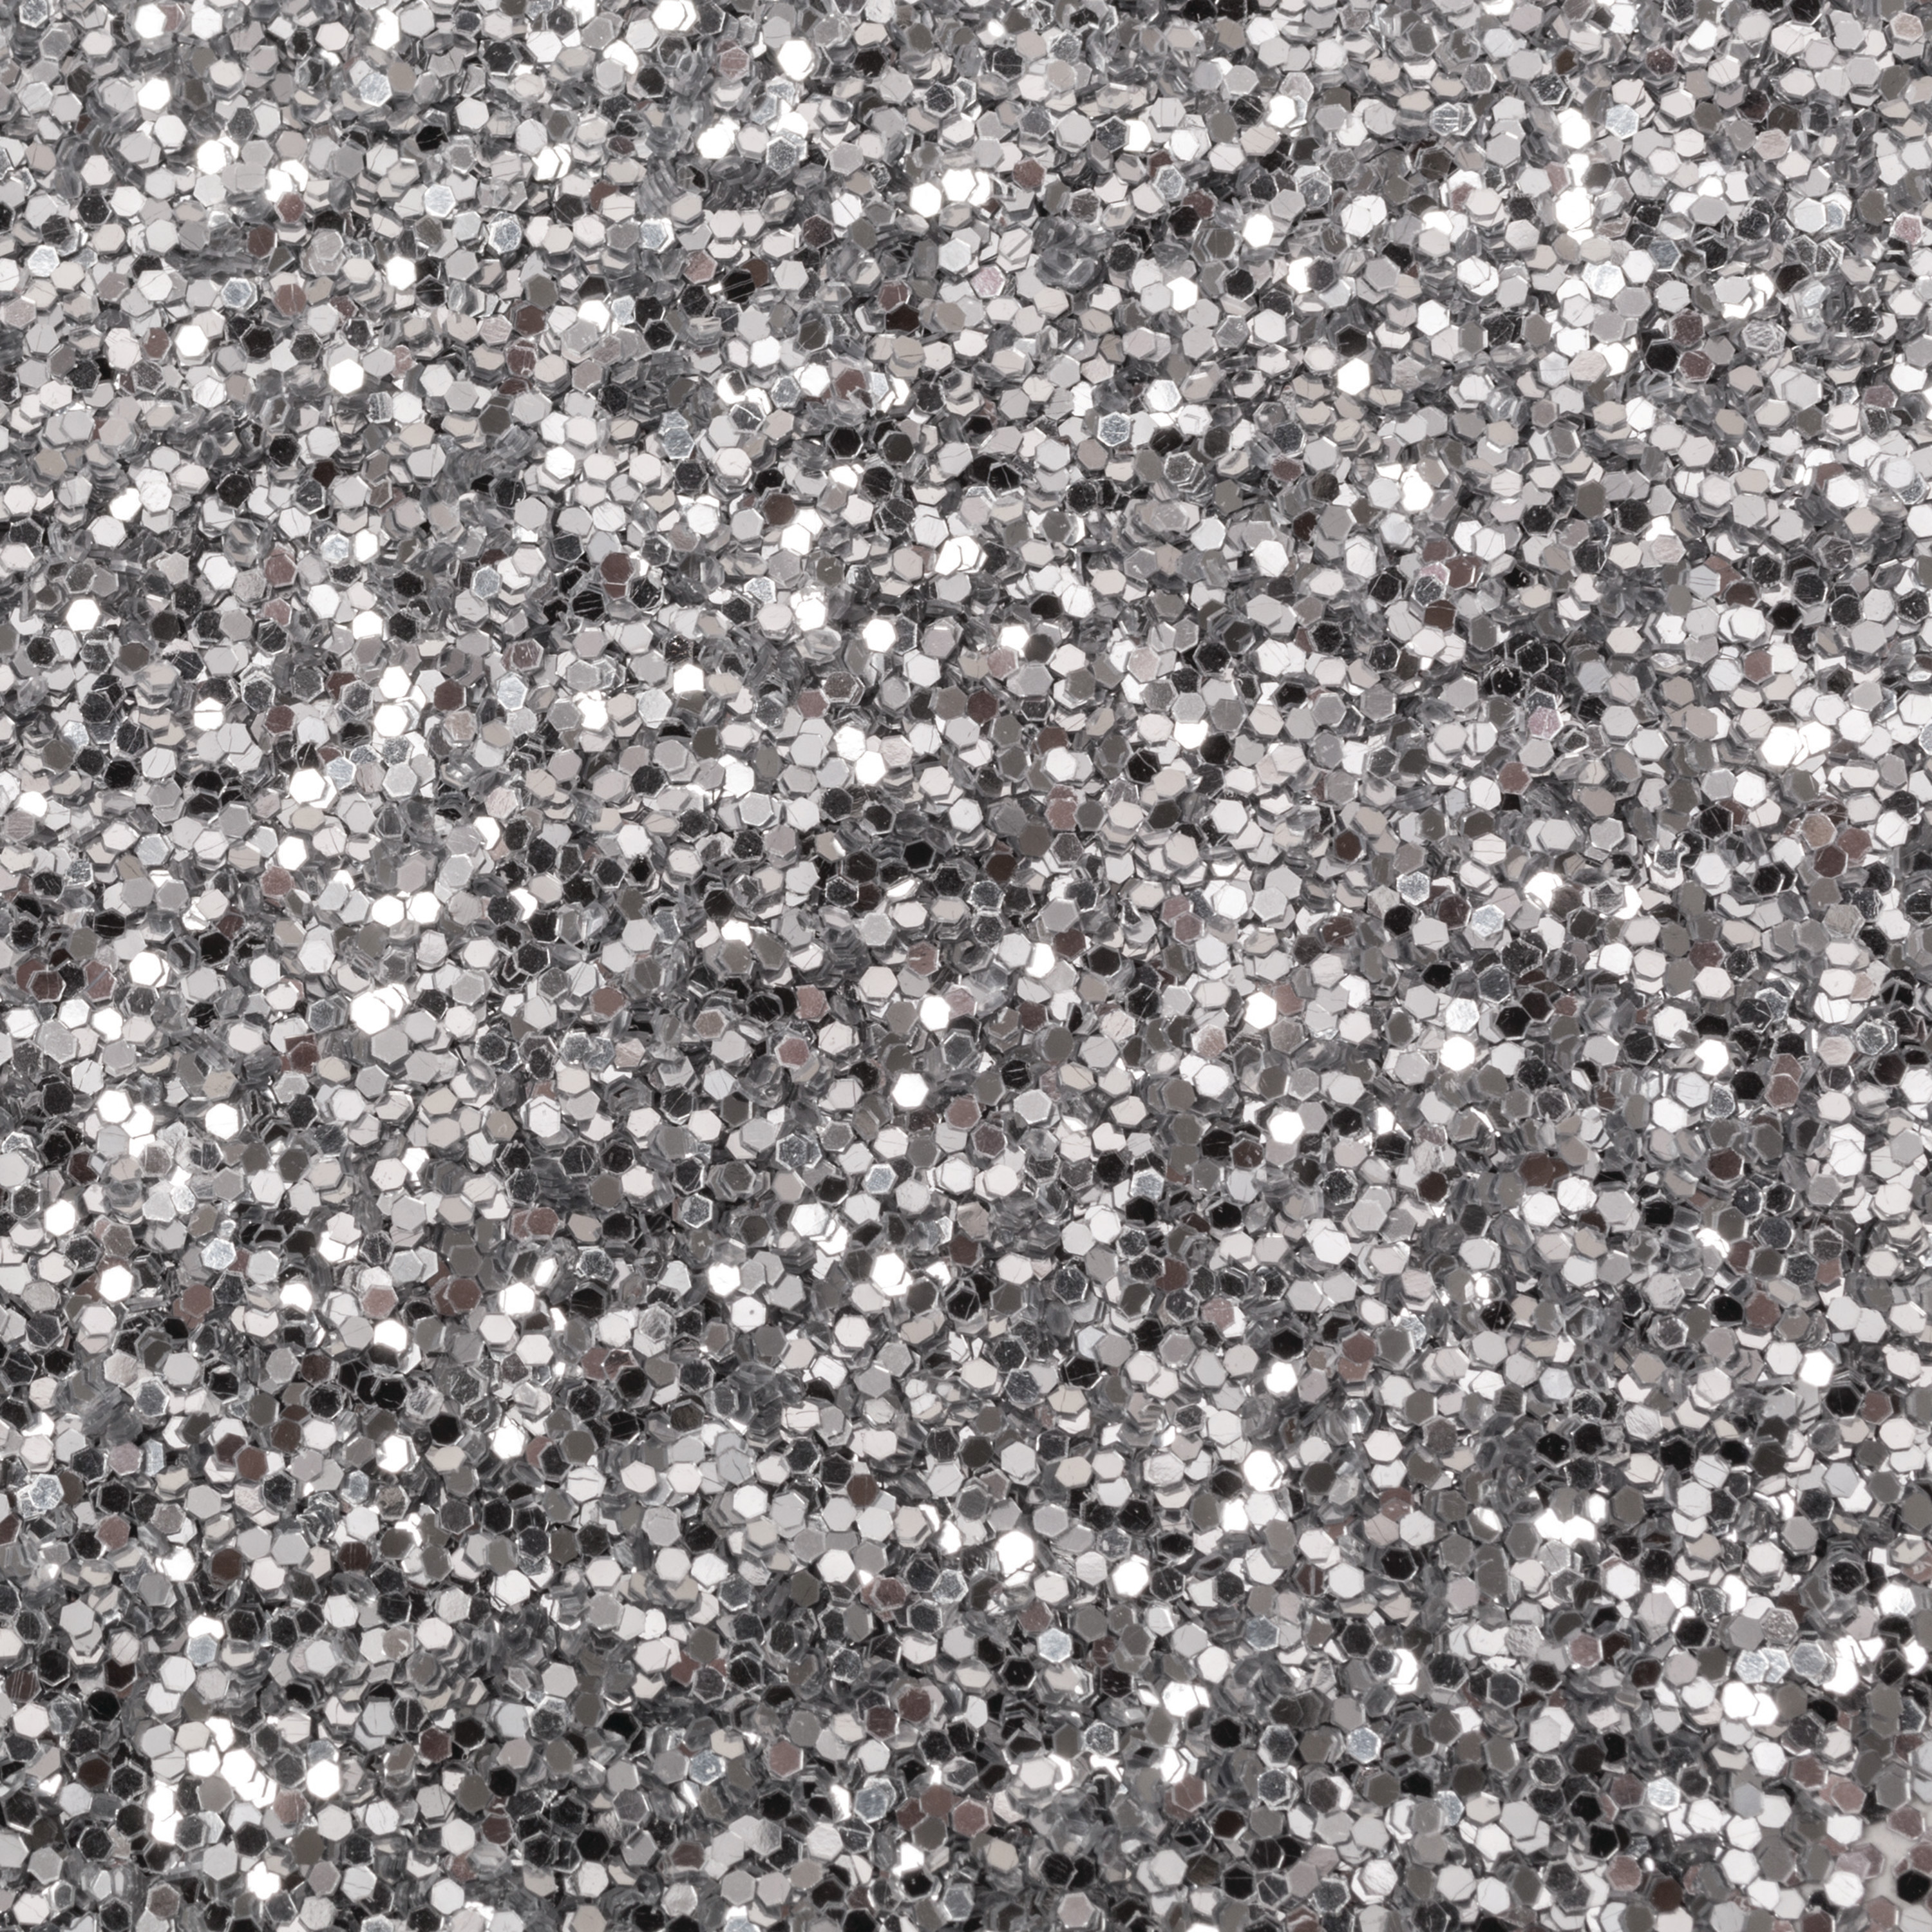 Pacon Spectra Glitter Sparkling Crystals, 16 oz., Silver - image 1 of 2